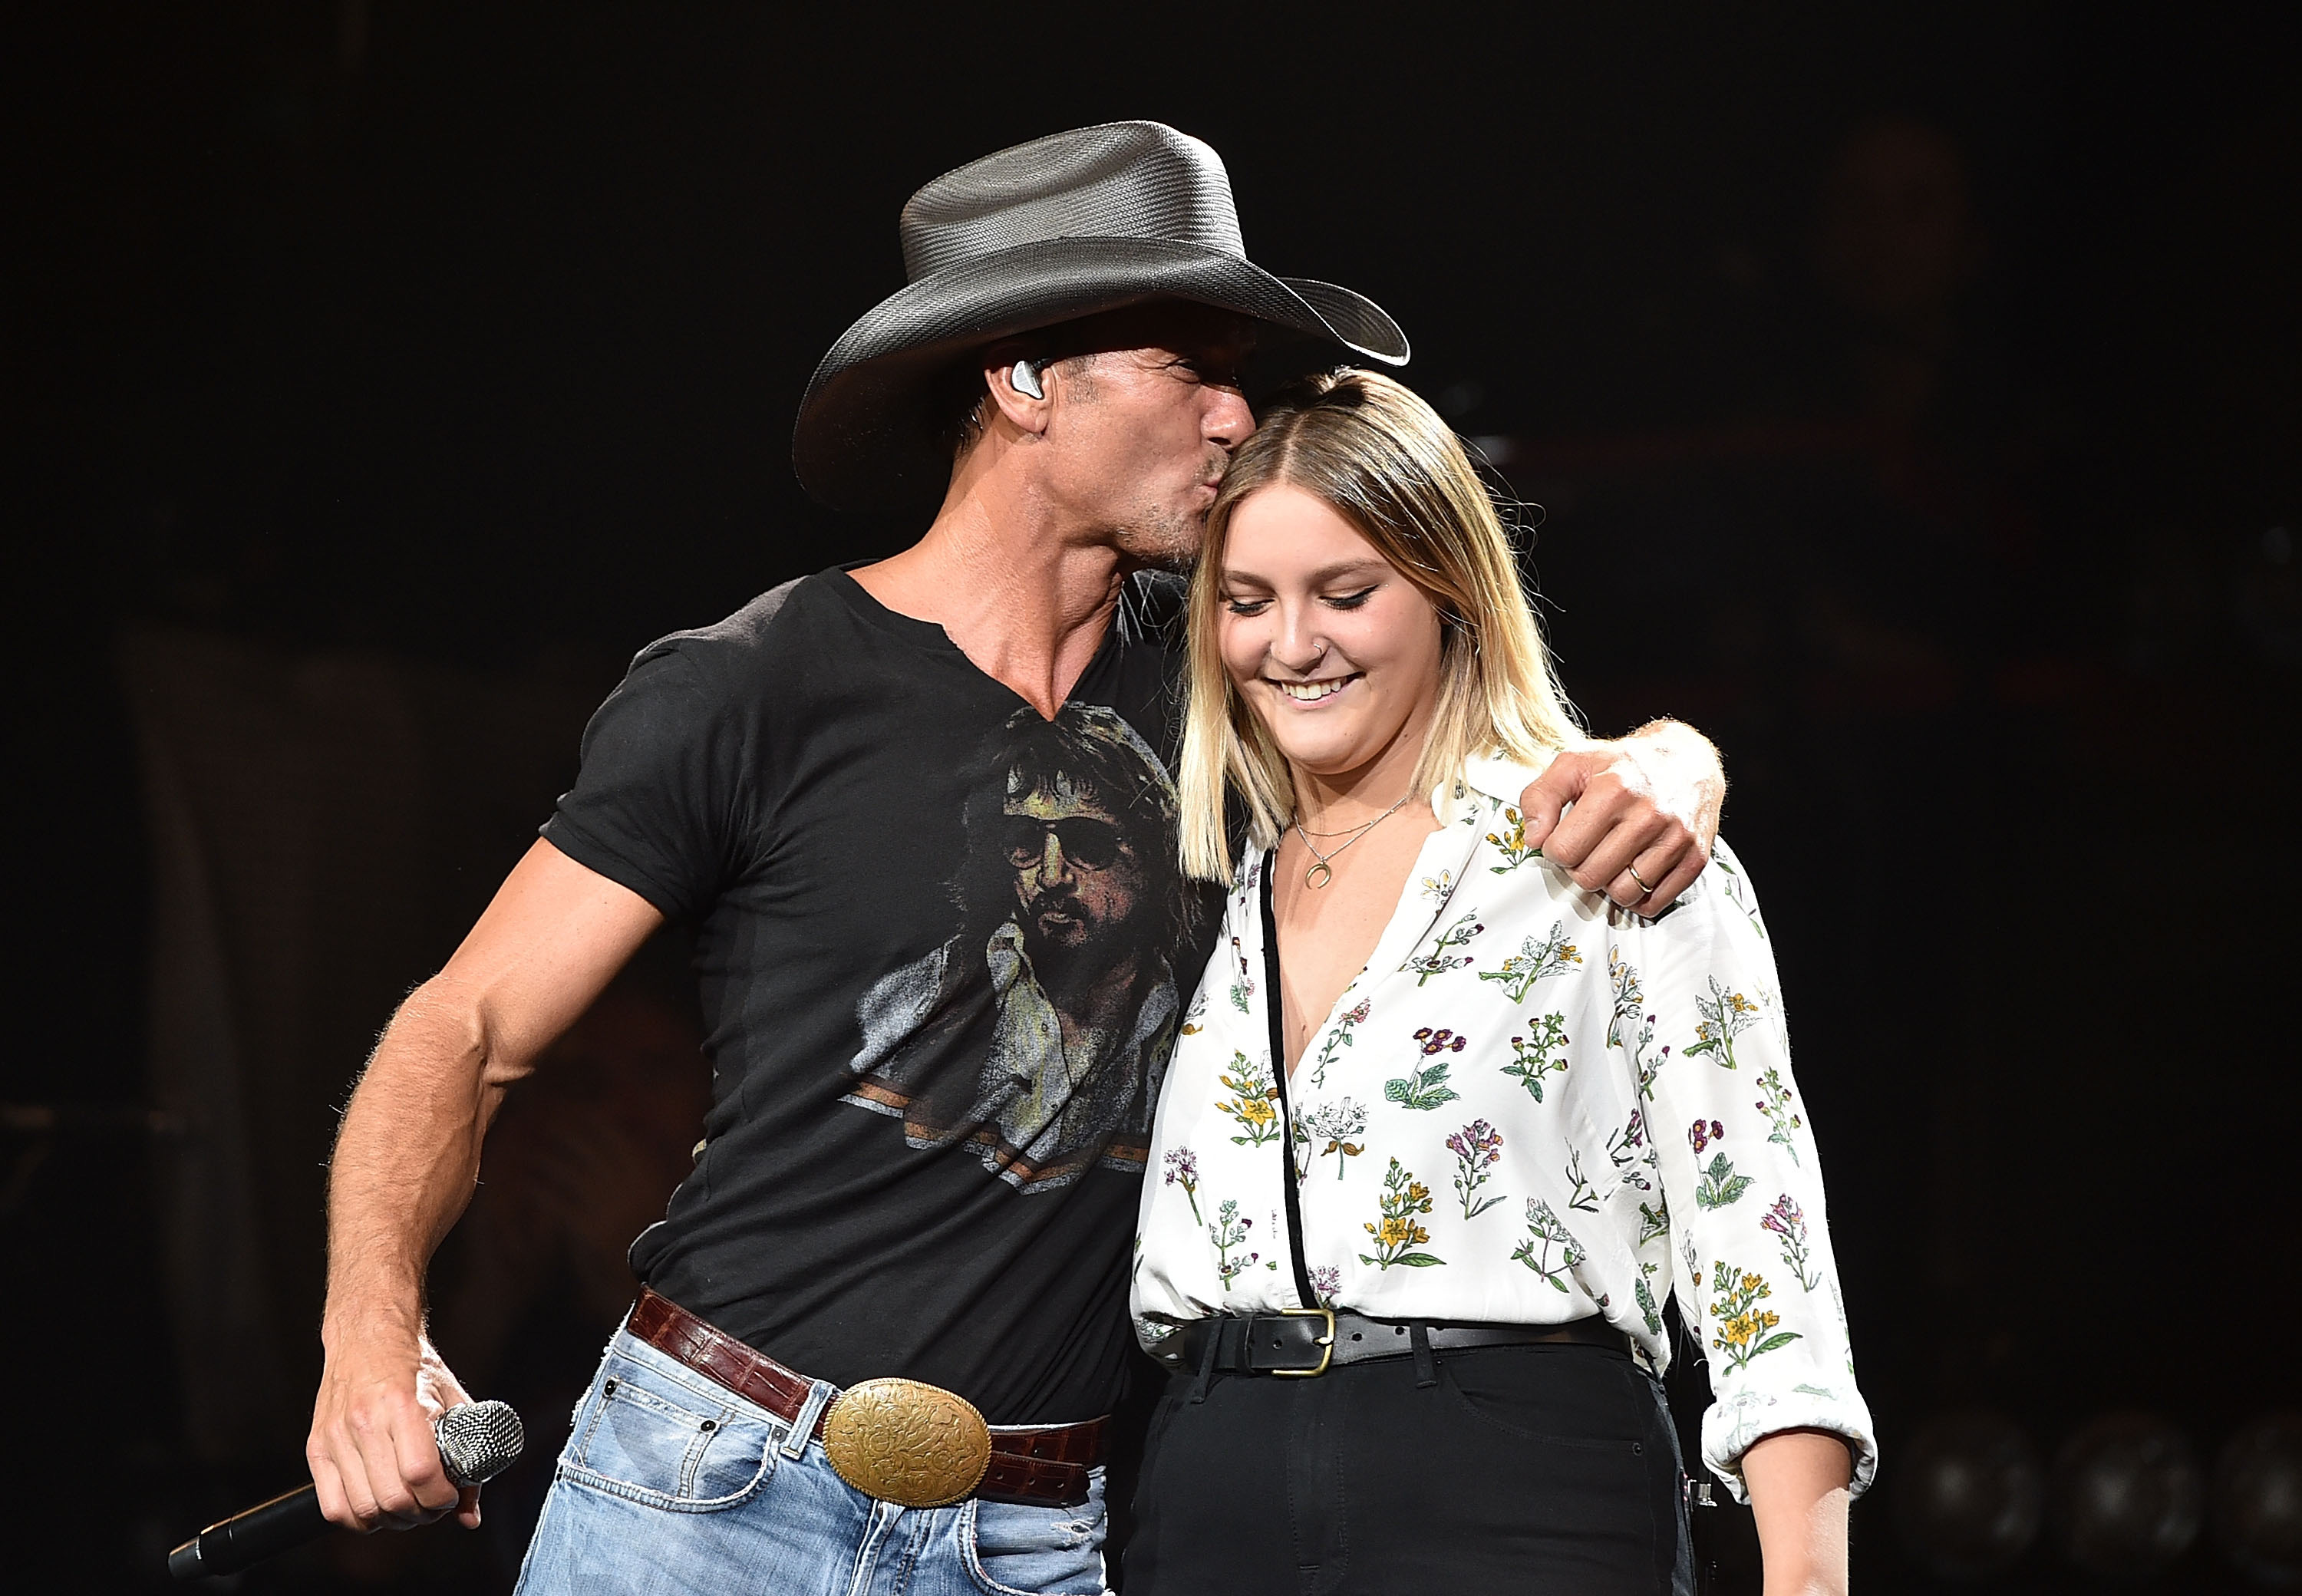 Tim McGraw, left, performs with his daughter Gracie McGraw on the "Shotgun Rider" tour at Bridgestone Arena on August 15, 2015 in Nashville, Tennessee. | Source: Getty Images